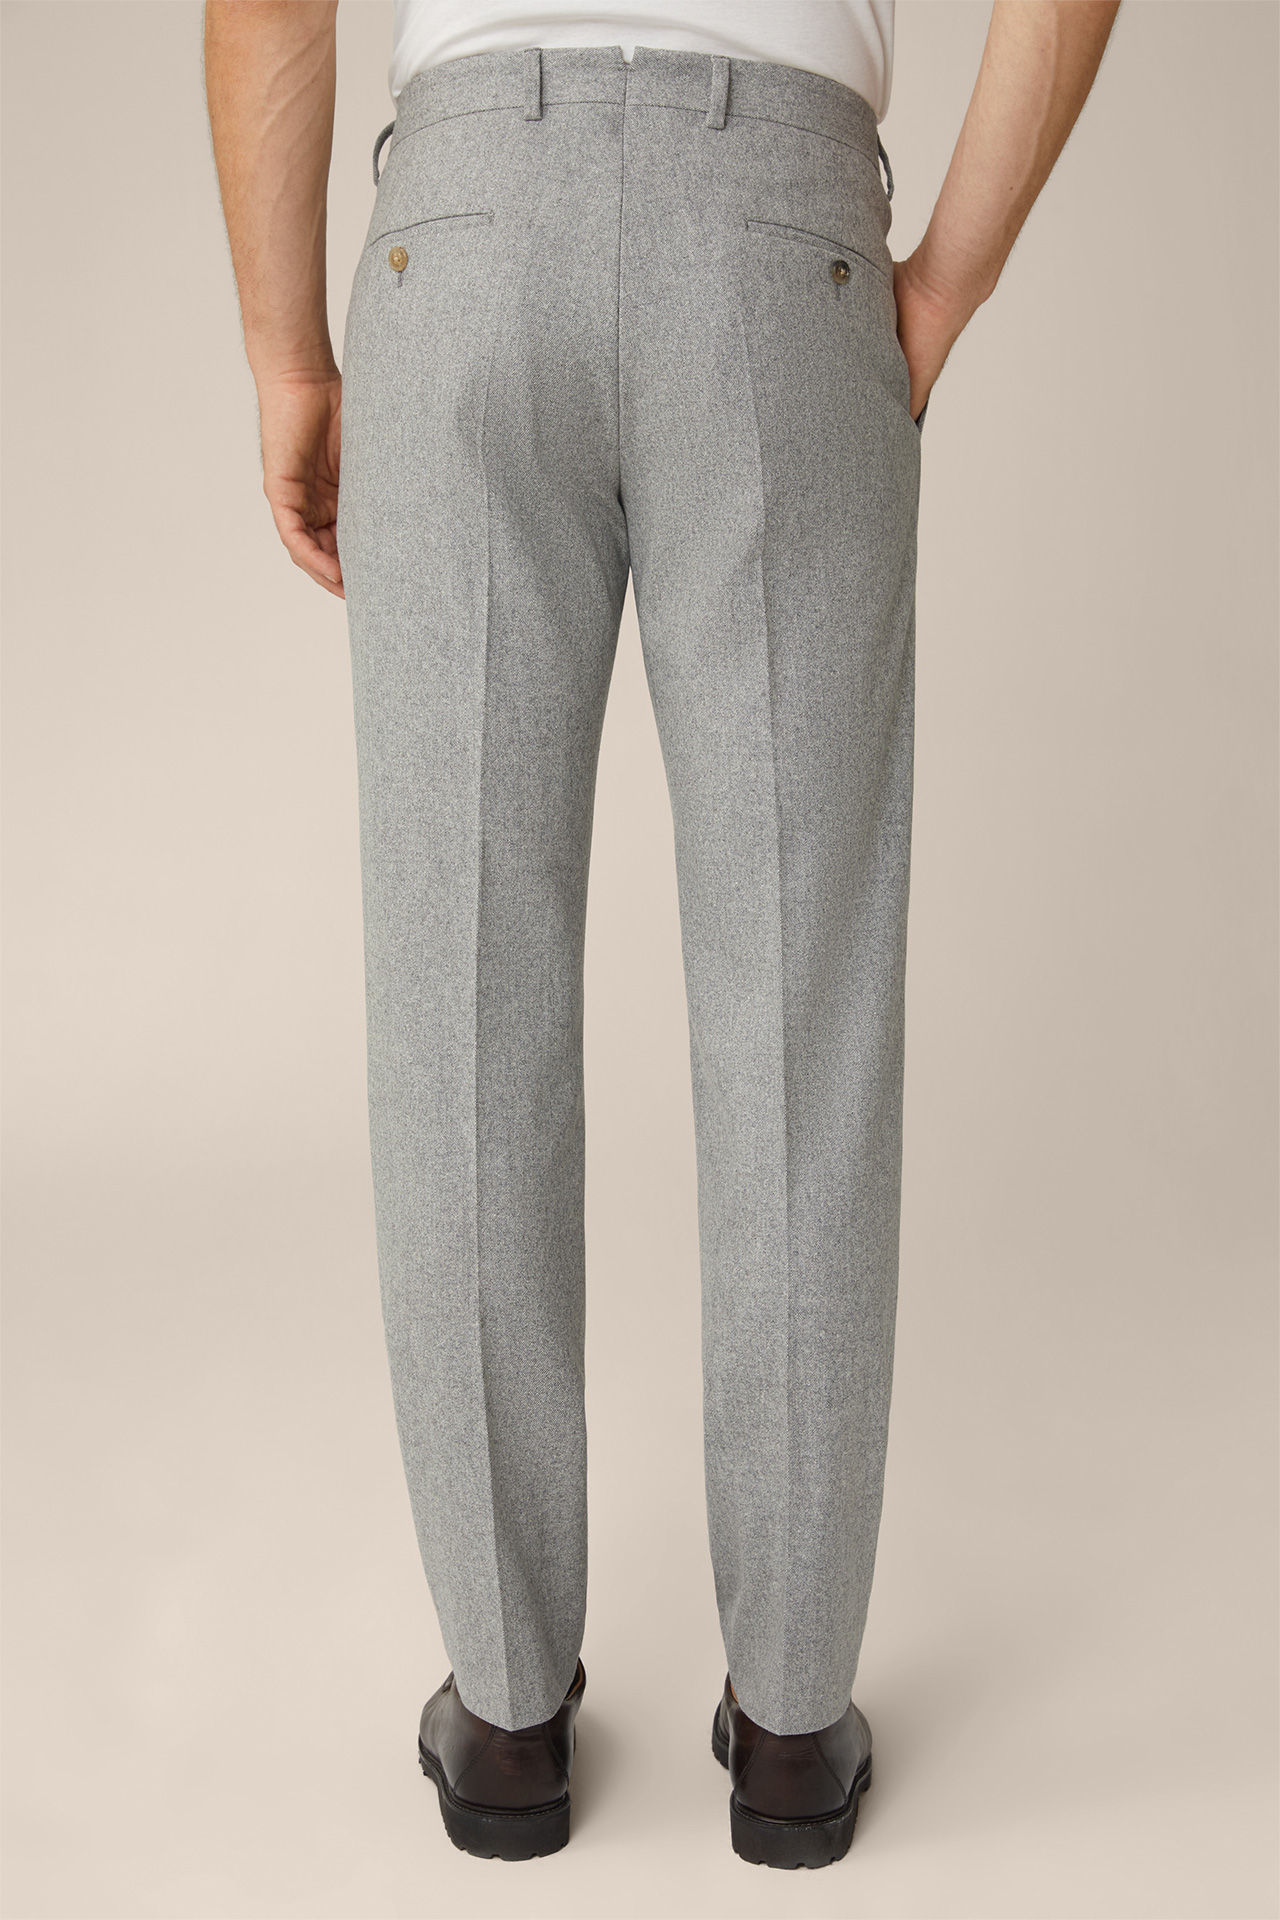  Bene Wool Blend Modular Trousers with Cashmere in Grey Marl